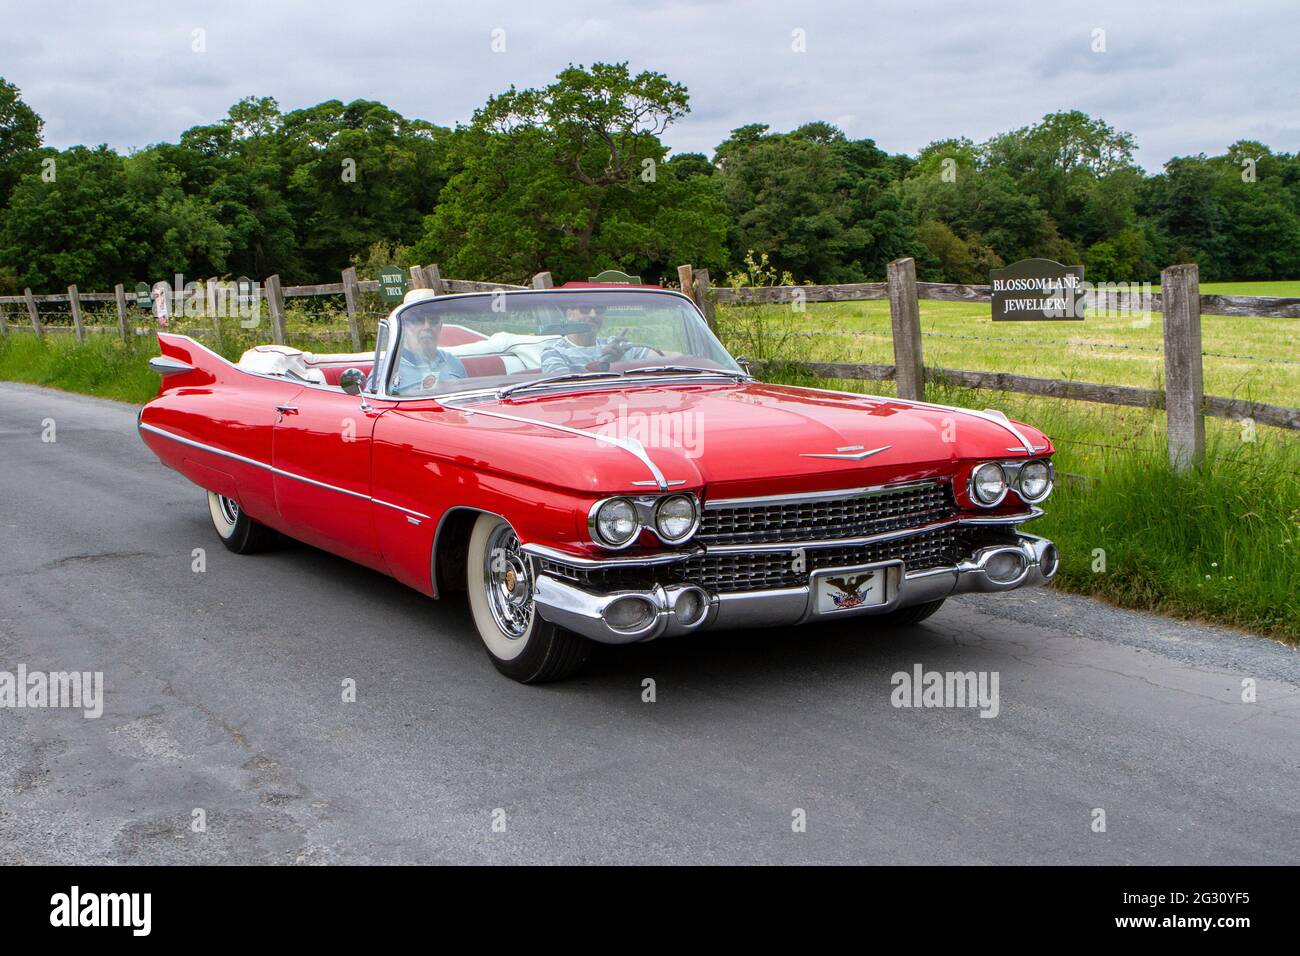 1954 50s Red Cadillac american muscle car with tail fins Annual Manchester to Blackpool Vintage & Classic Car Stock Photo